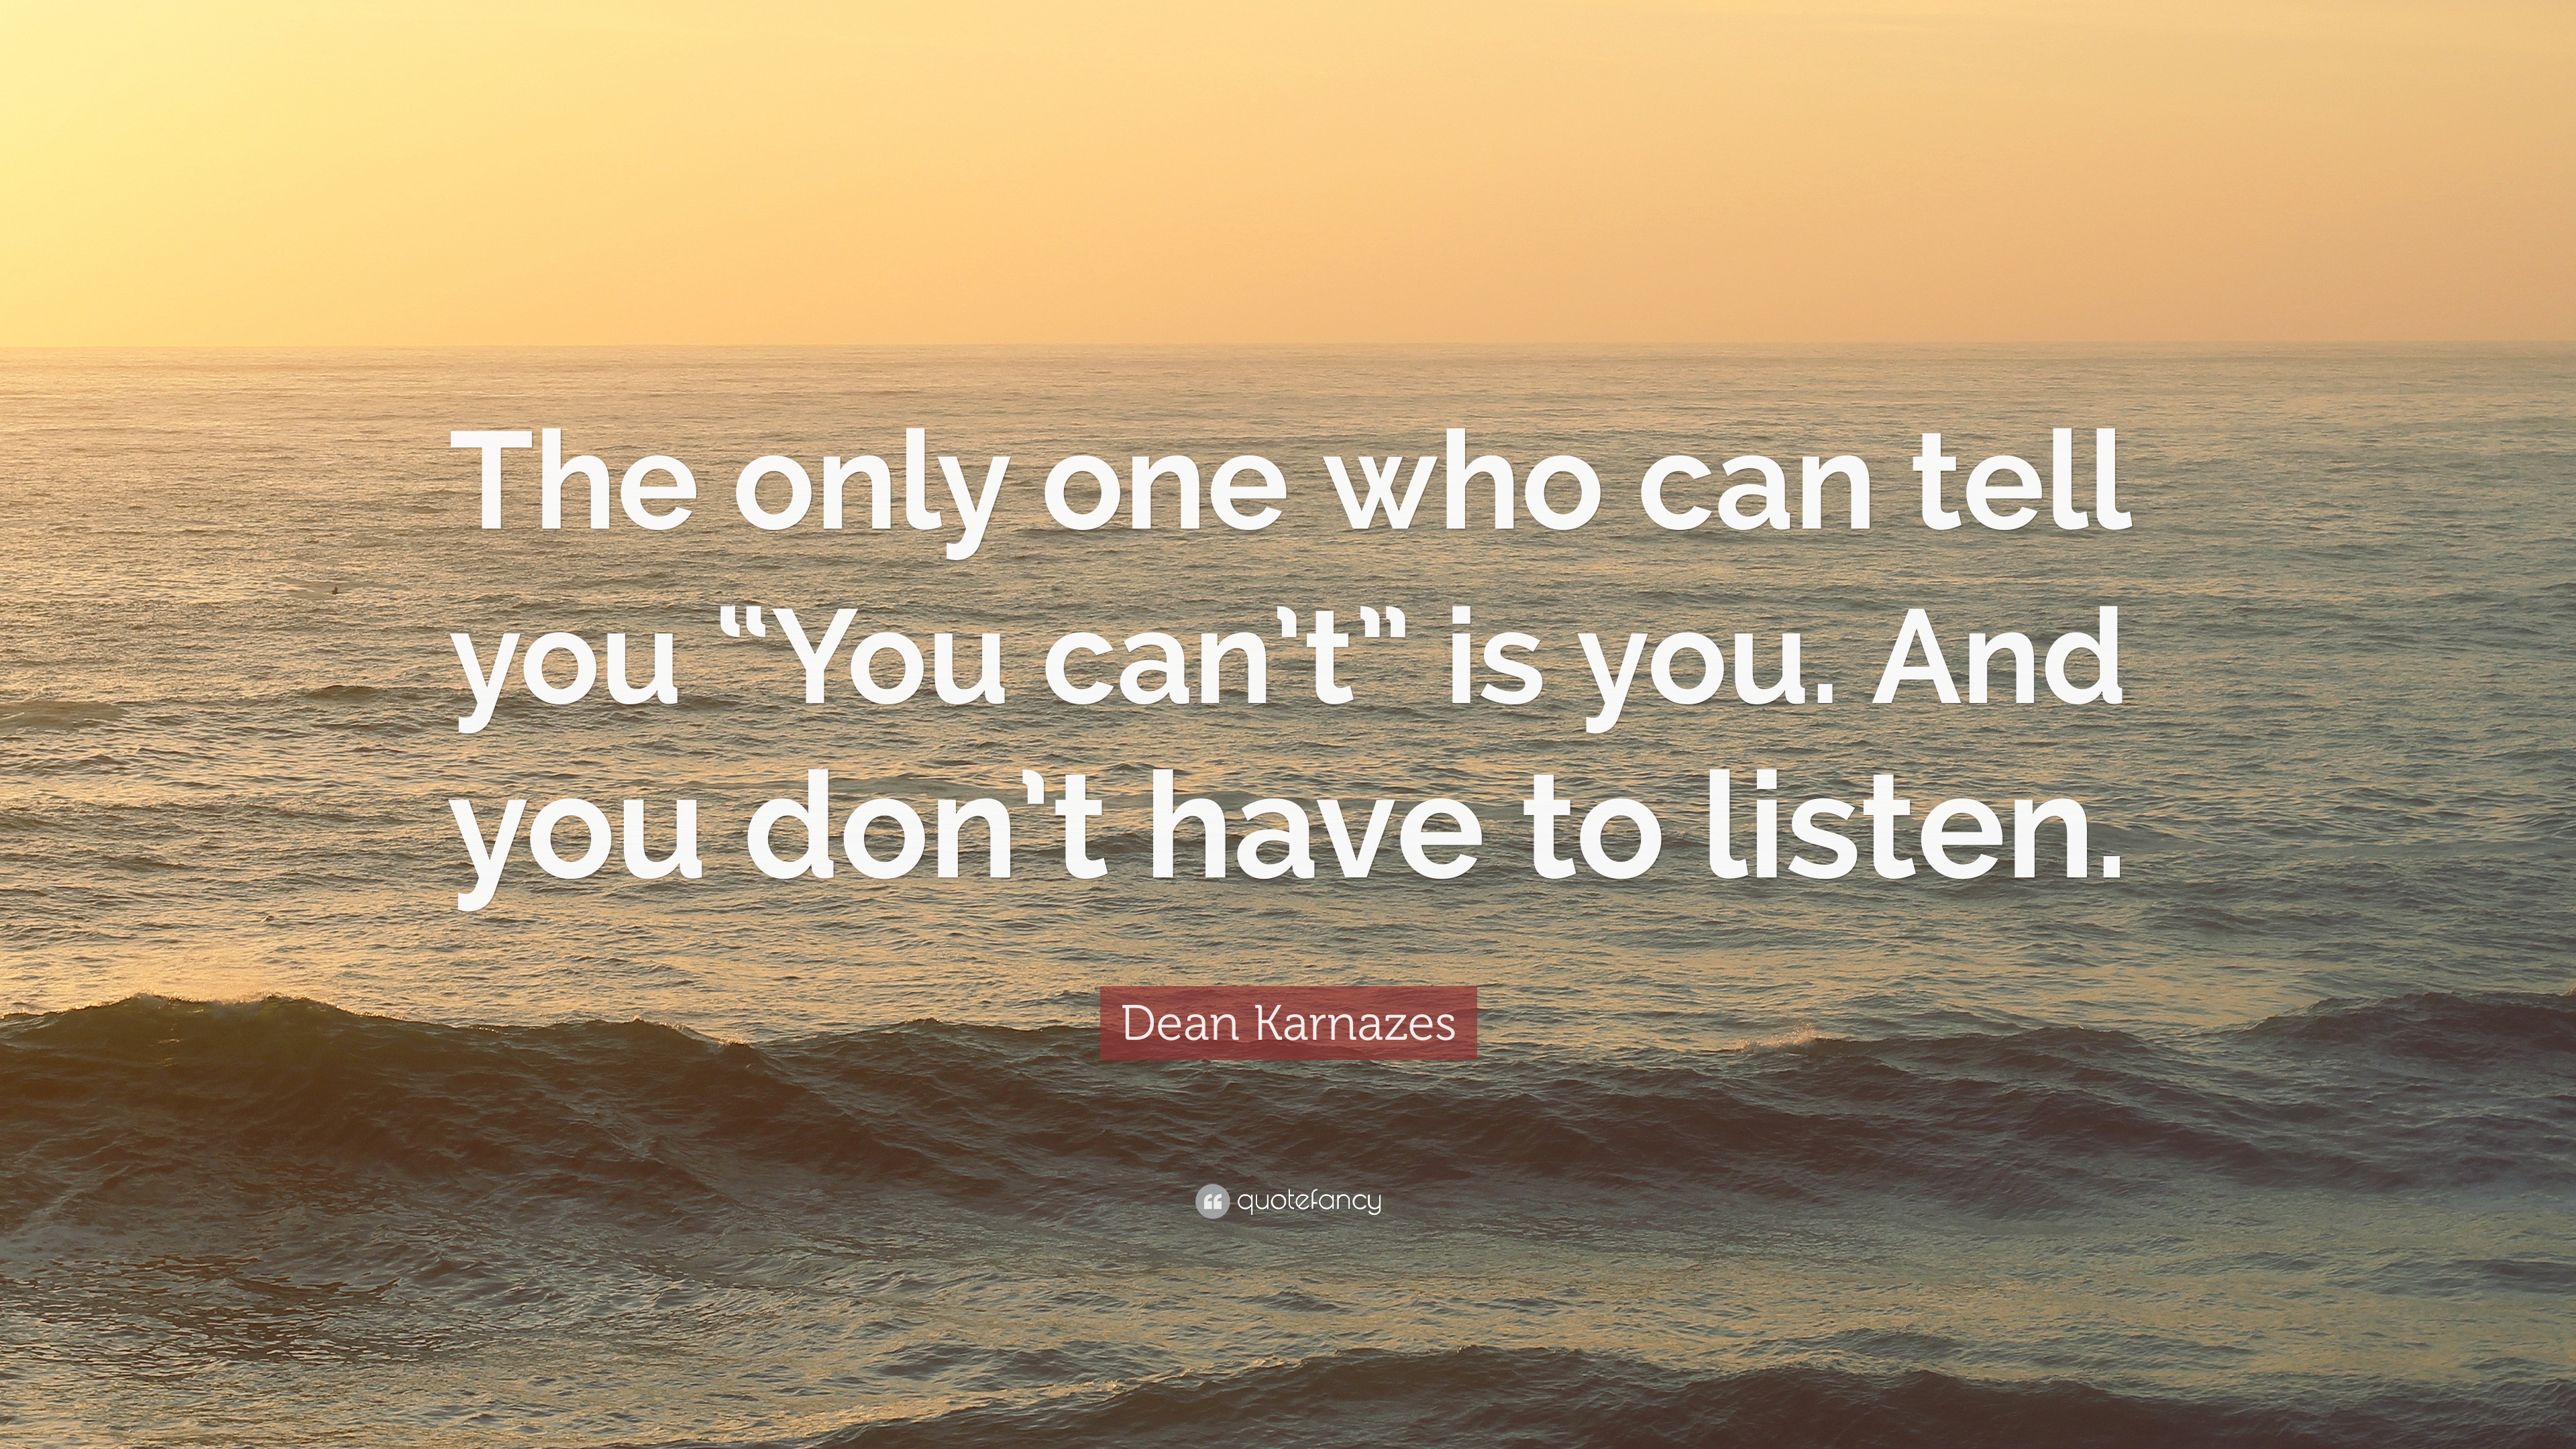 Dean Karnazes Quote: “The only one who can tell you “You can’t” is you ...